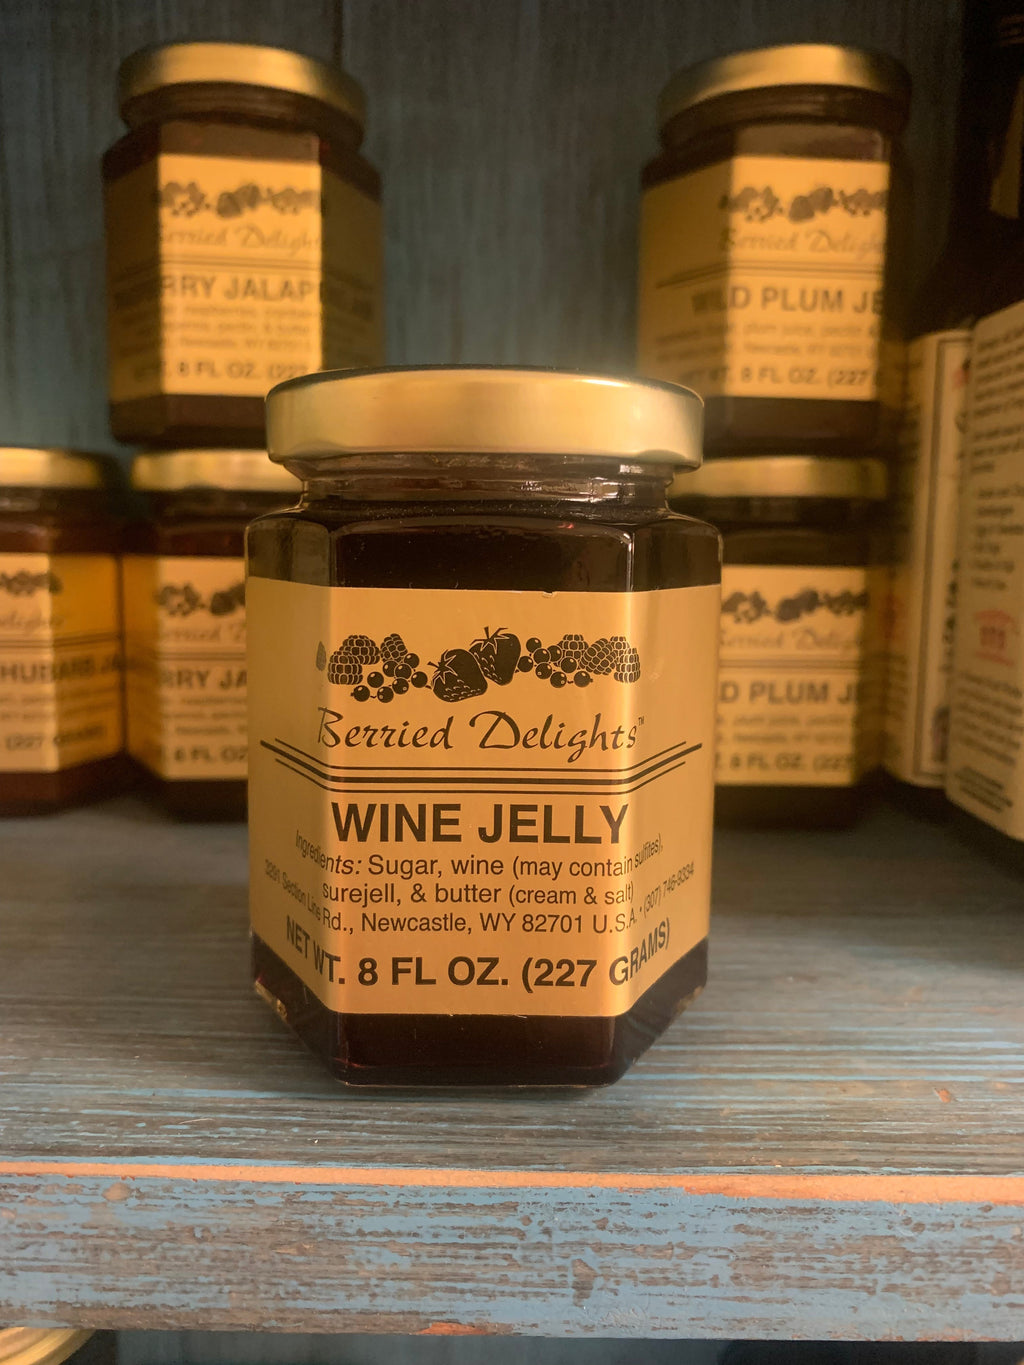 BERRIED DELIGHTS: Wine Jelly